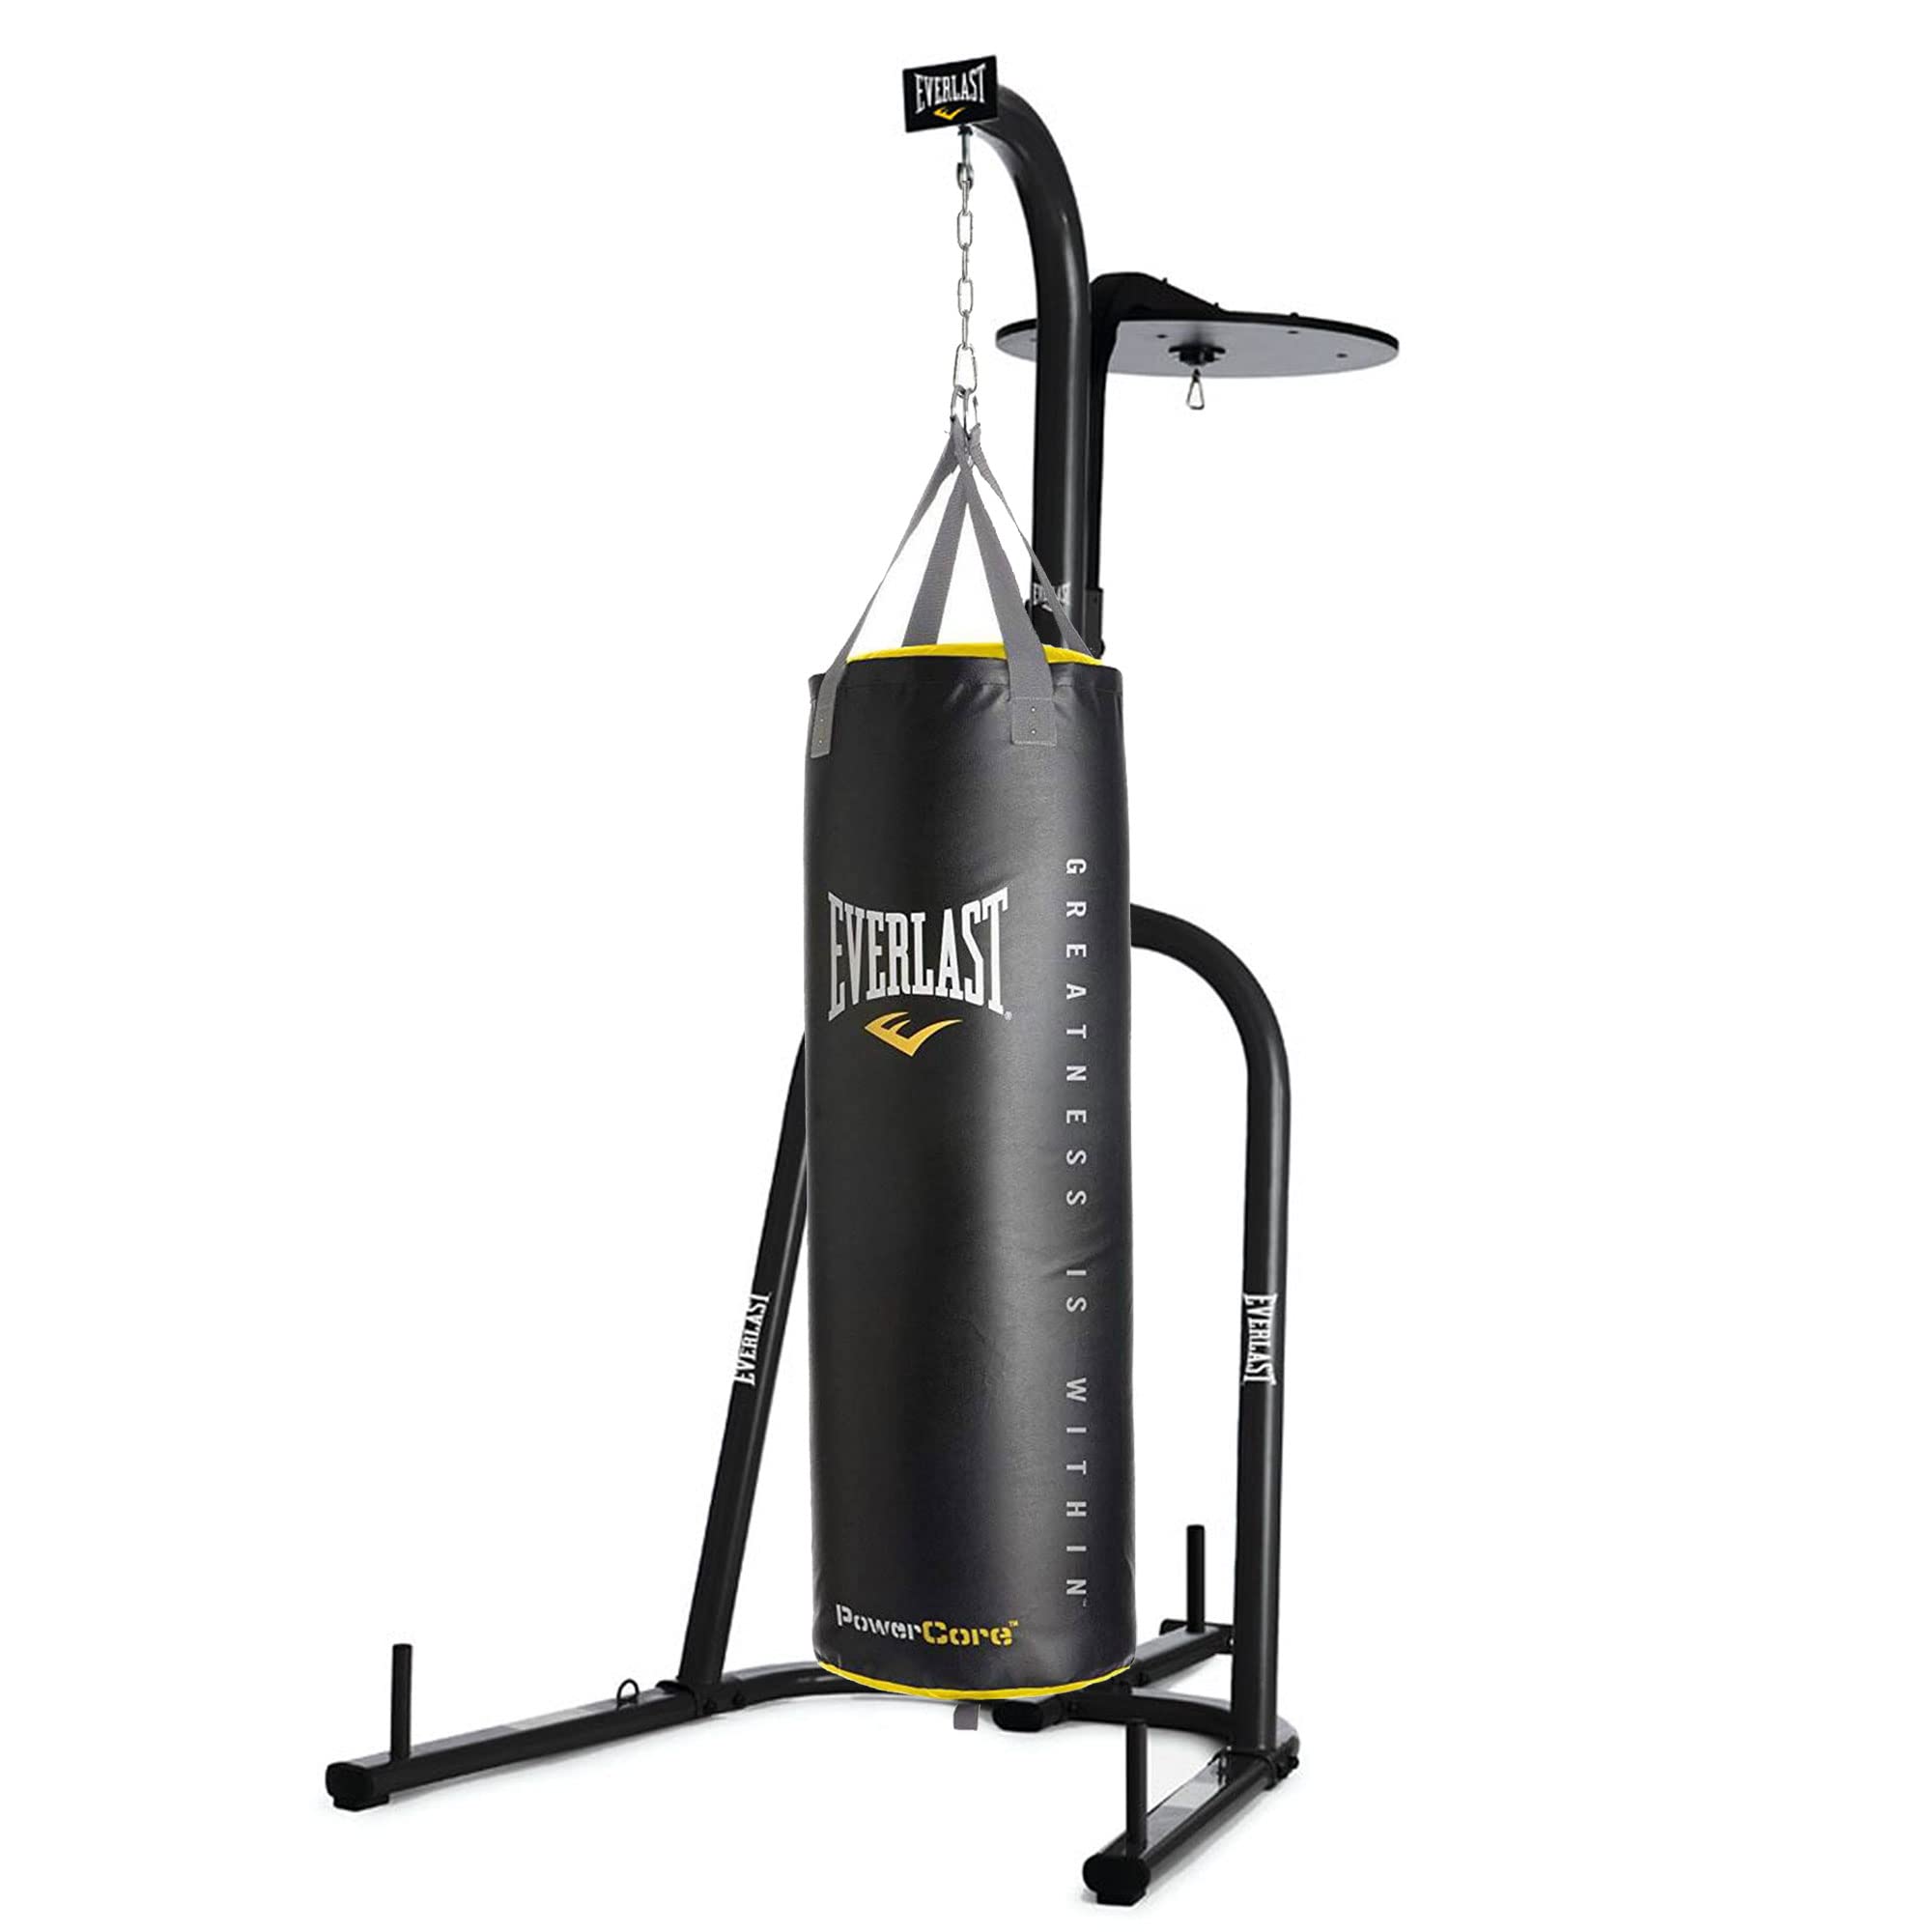 Free Standing Boxing Punching Bag - Boxing Stand Dummy Target Fitness Kick  MMA | eBay